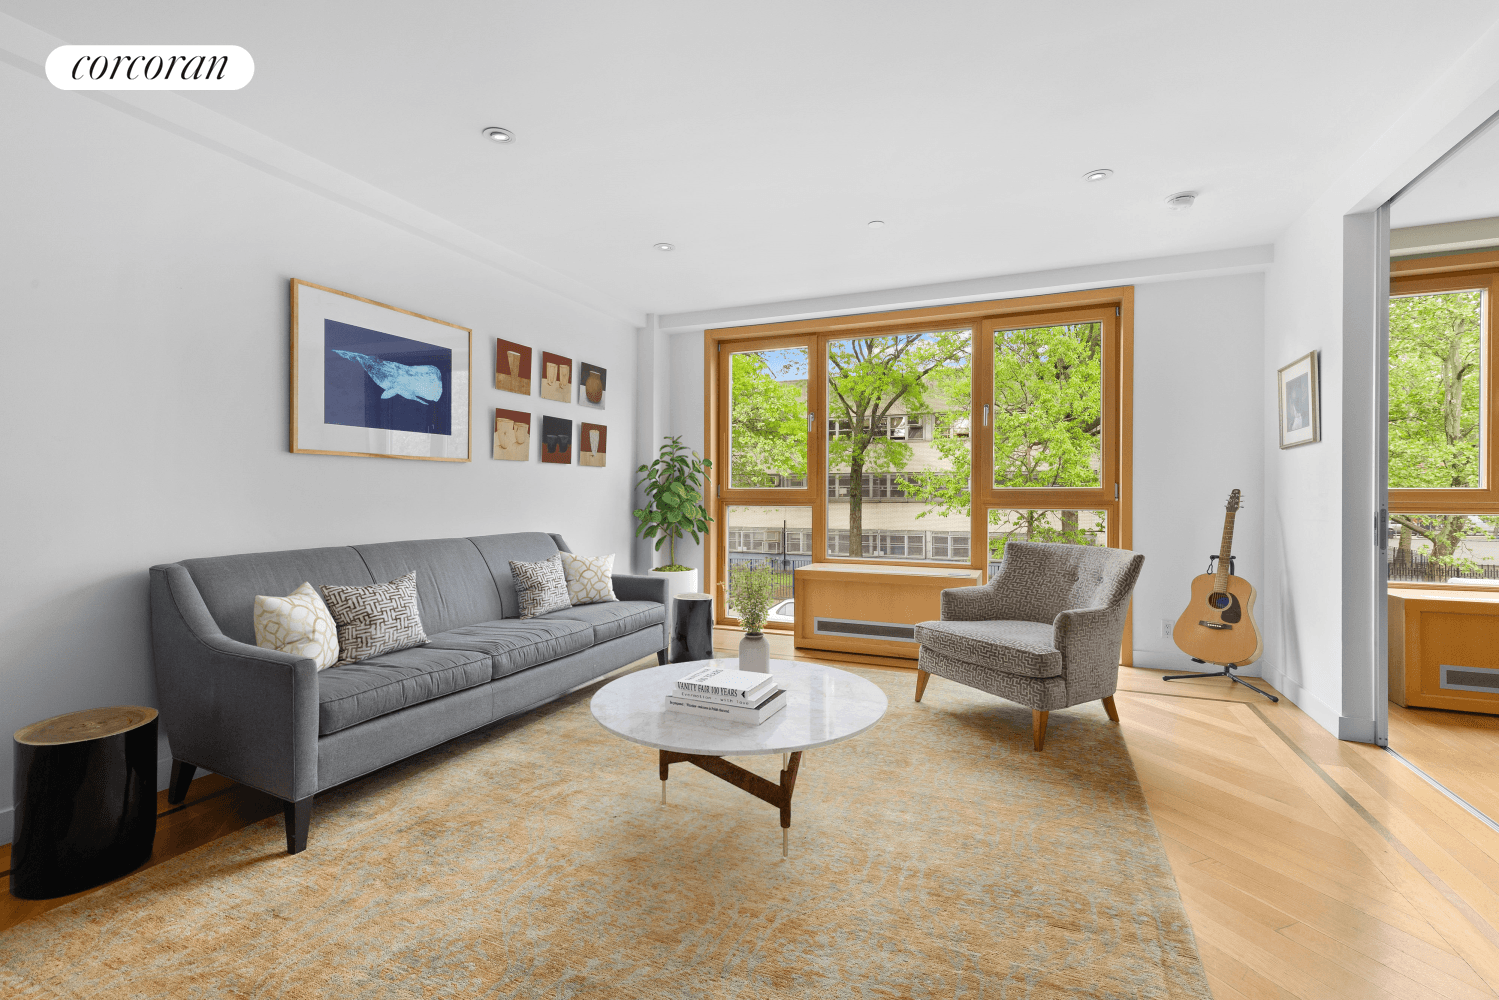 Welcome to 122 Adelphi Street 2B the rarest of offerings with three bedrooms, two bathrooms and a keyed elevator opening directly into the sun splashed apartment !